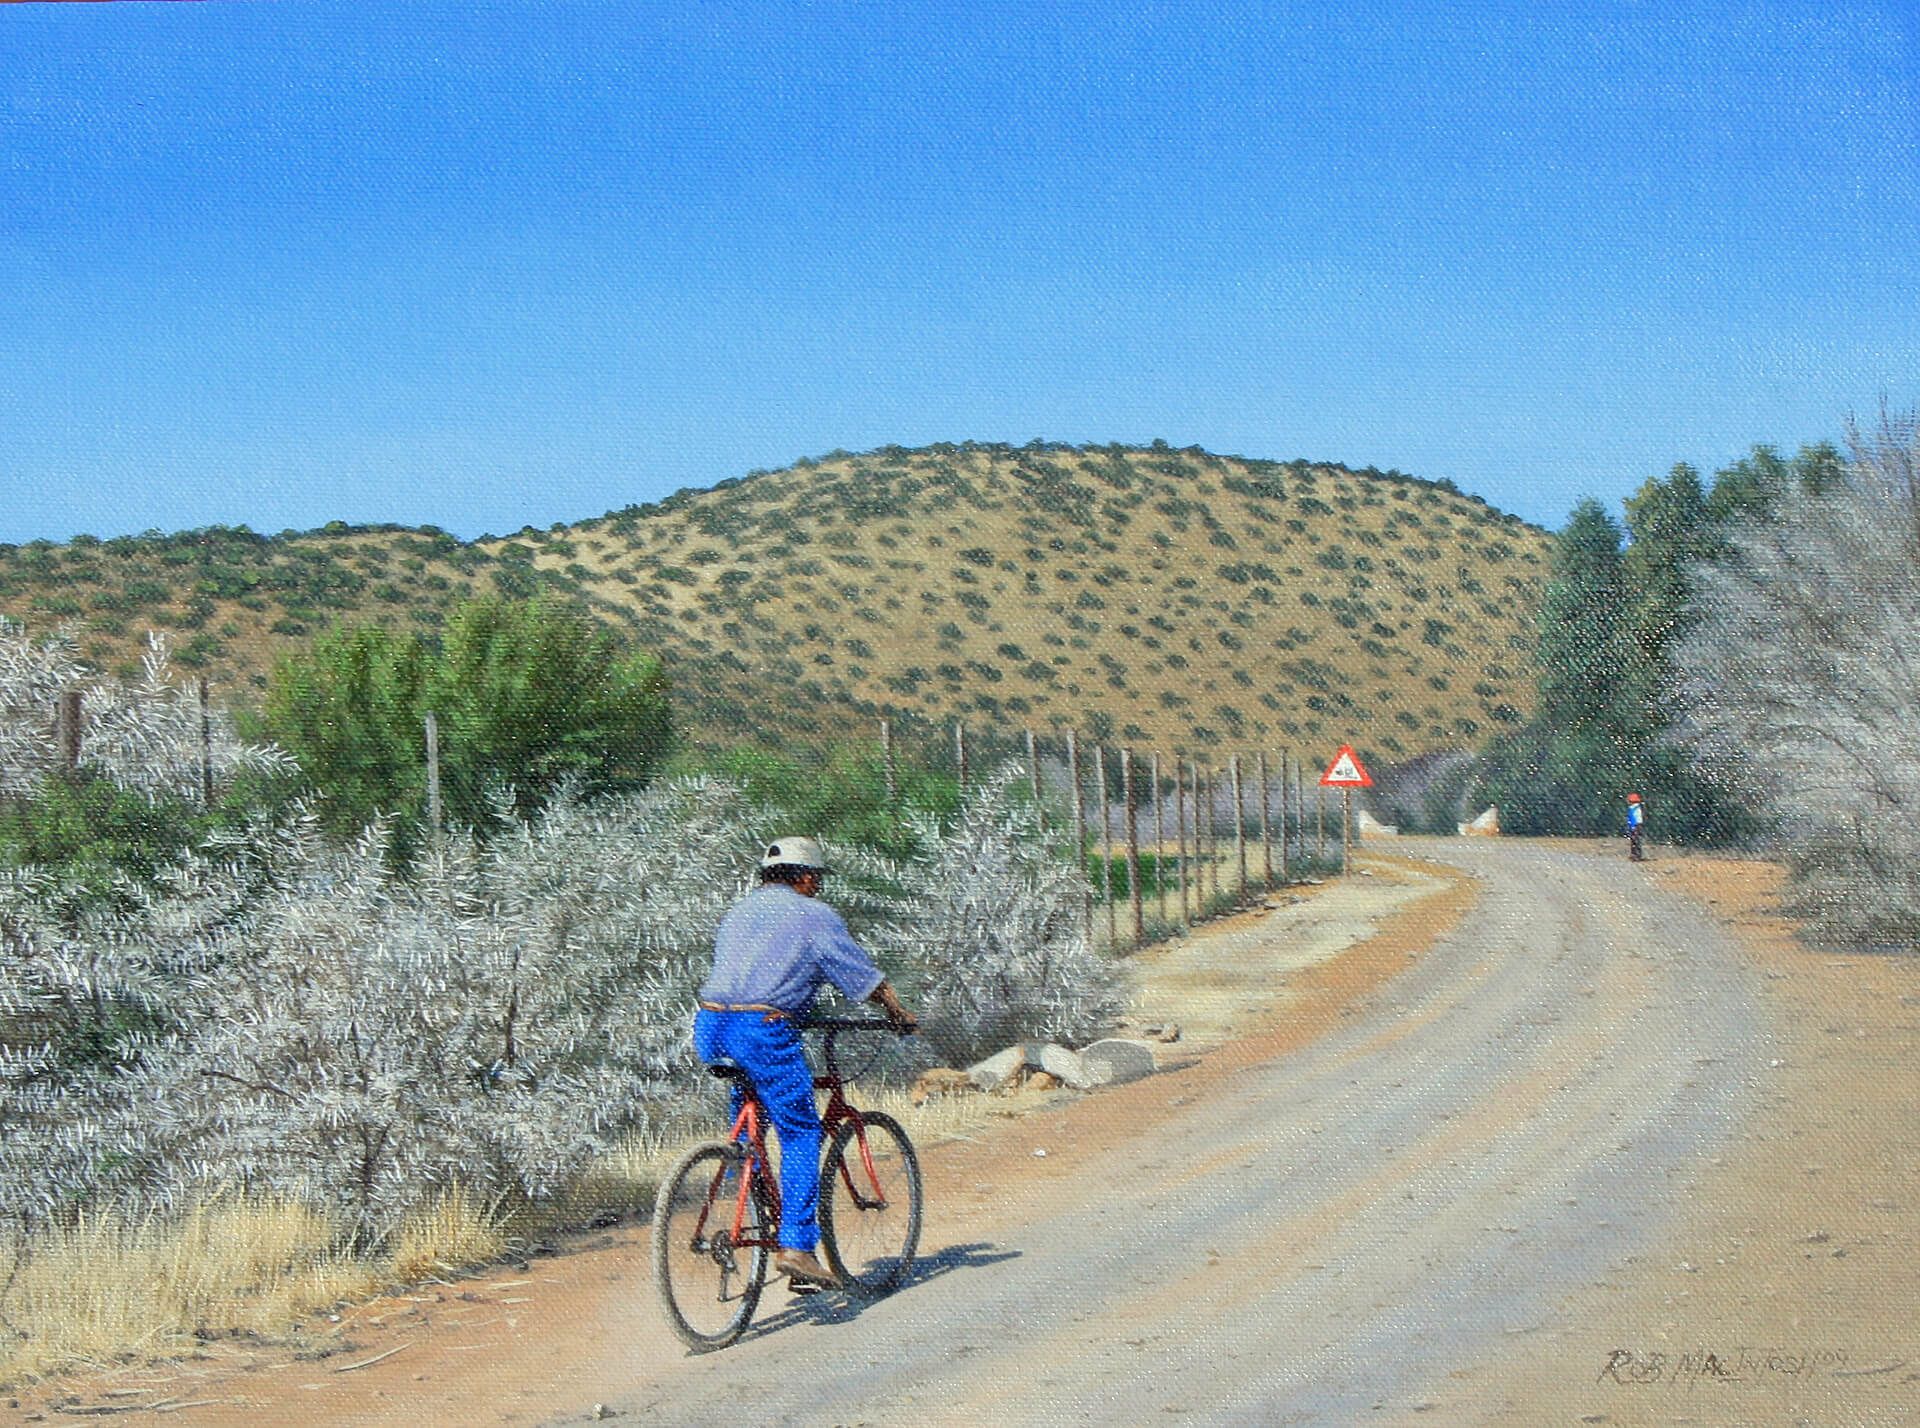 Photorealistic painting of a man cycling down a dirt road